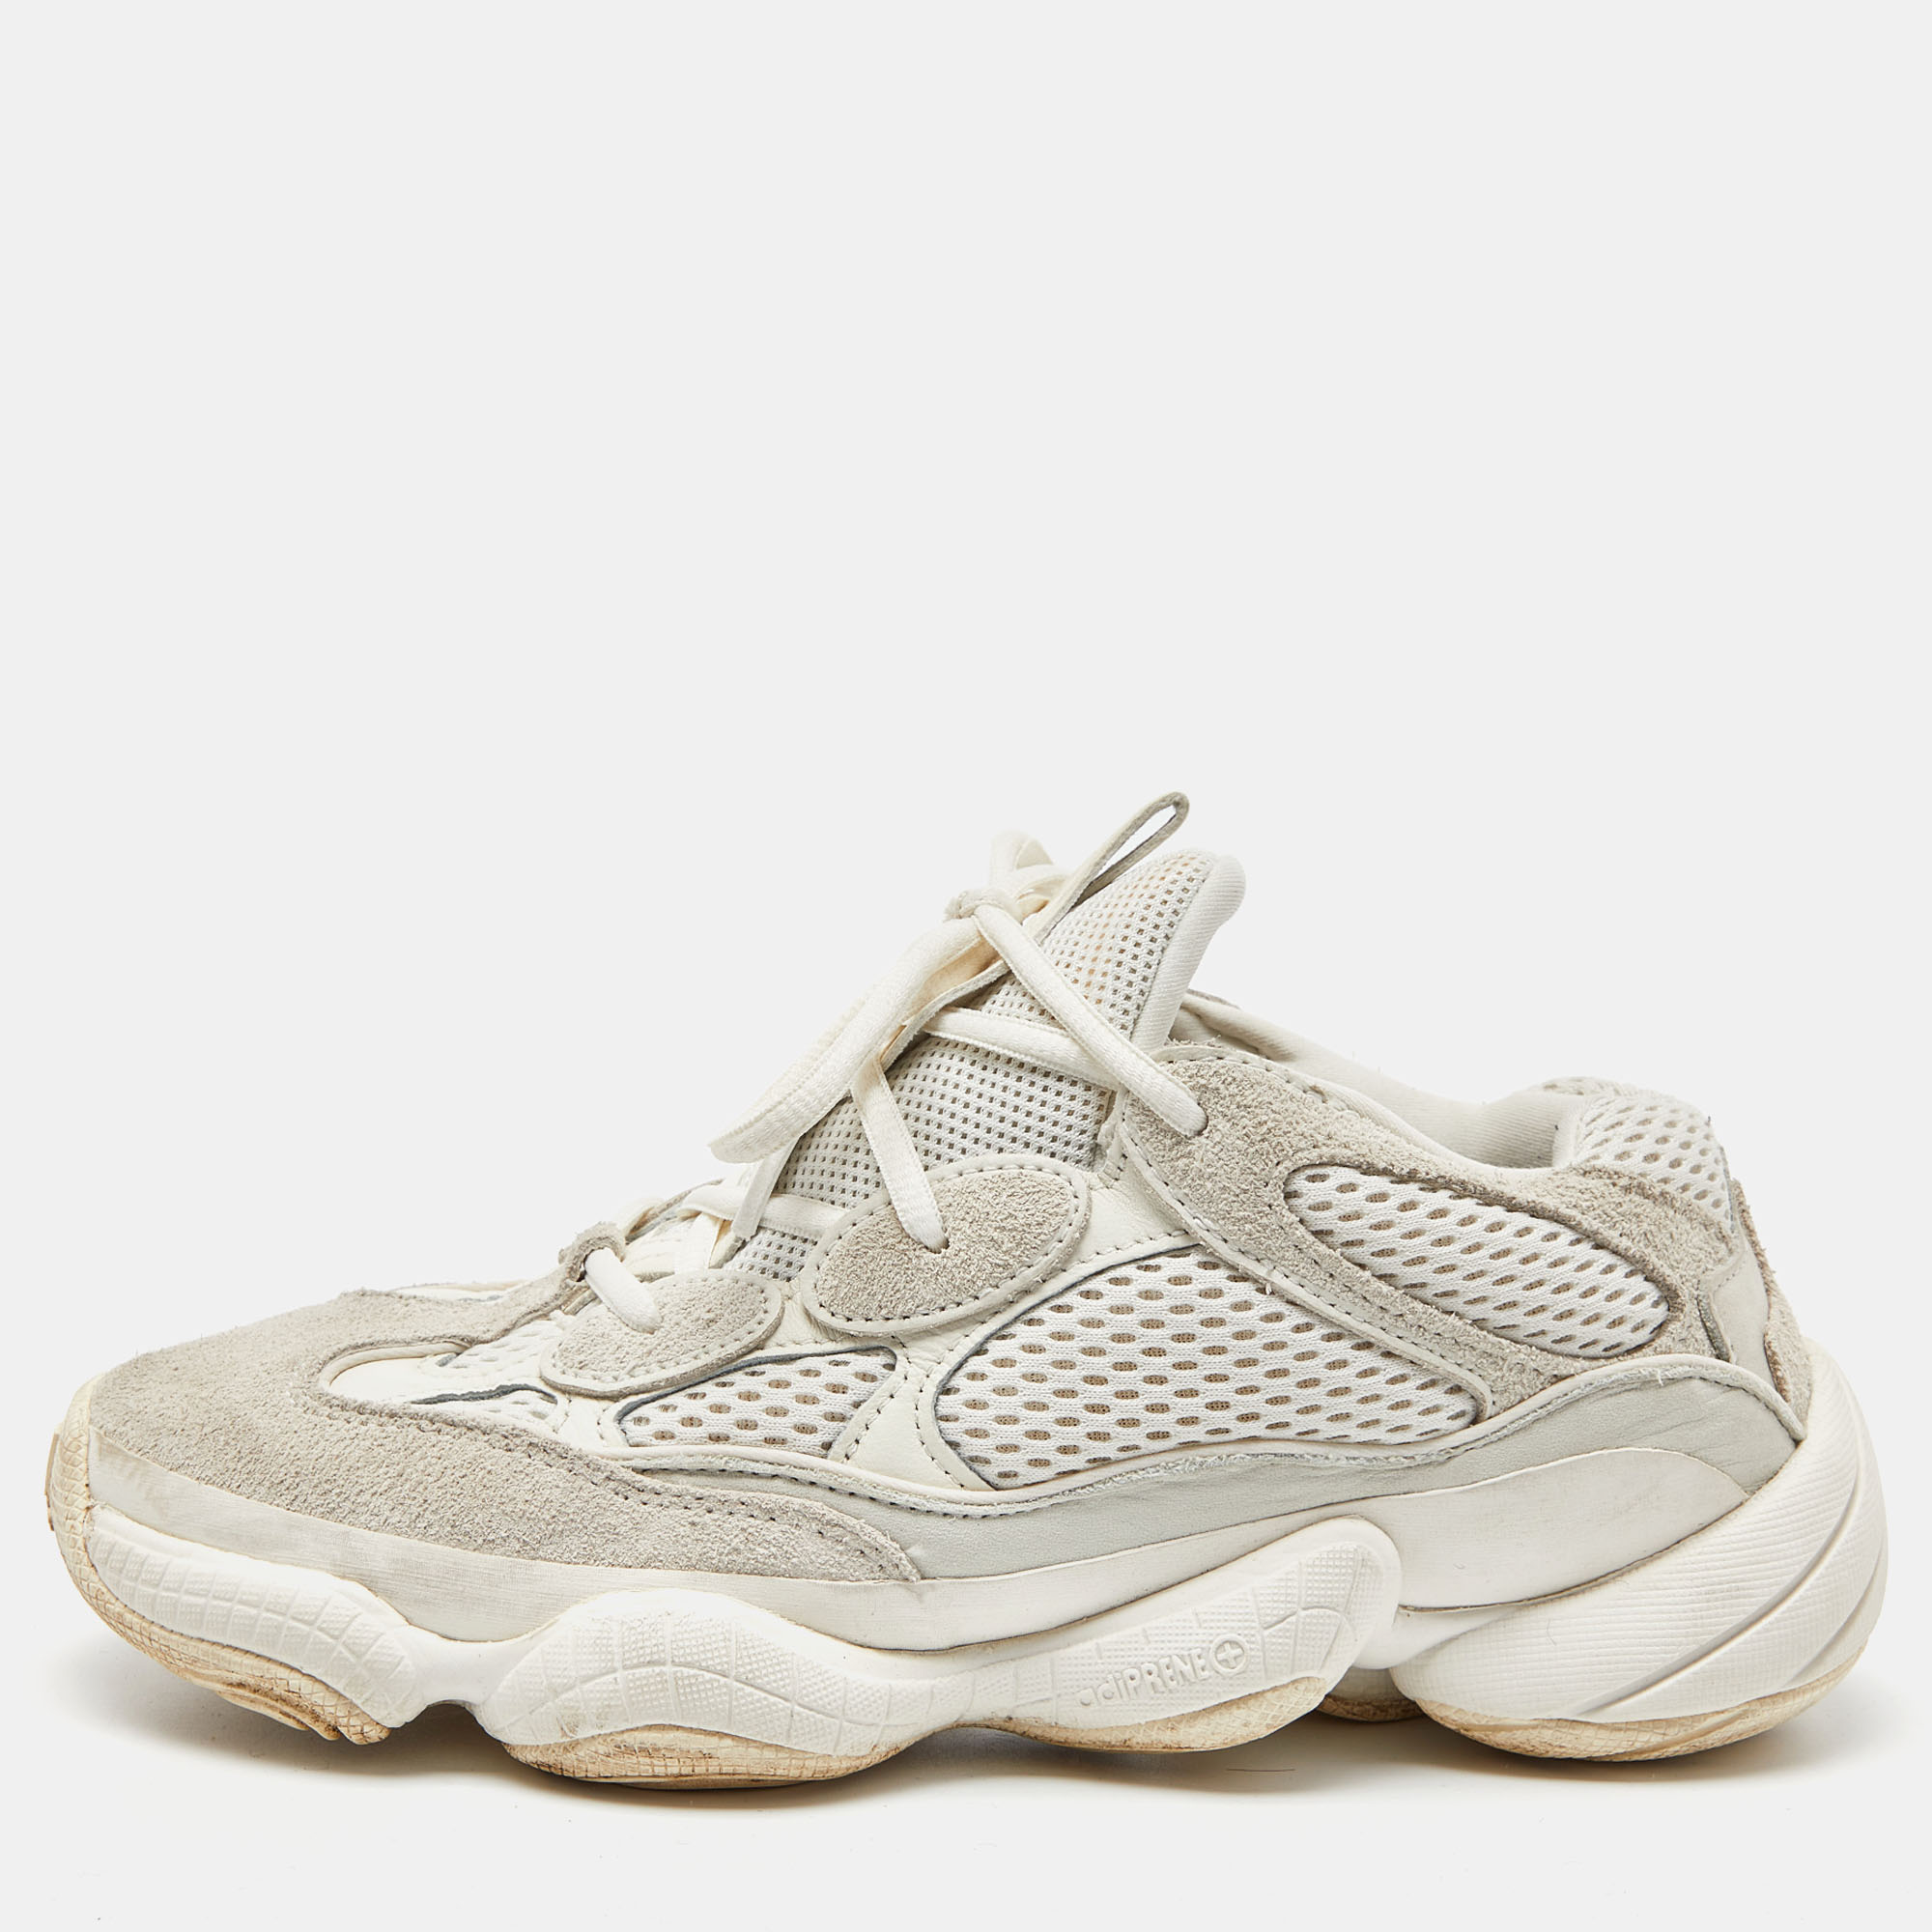 Pre-owned Yeezy X Adidas White Suede And Mesh Yeezy 500 Bone White Trainers Size 40